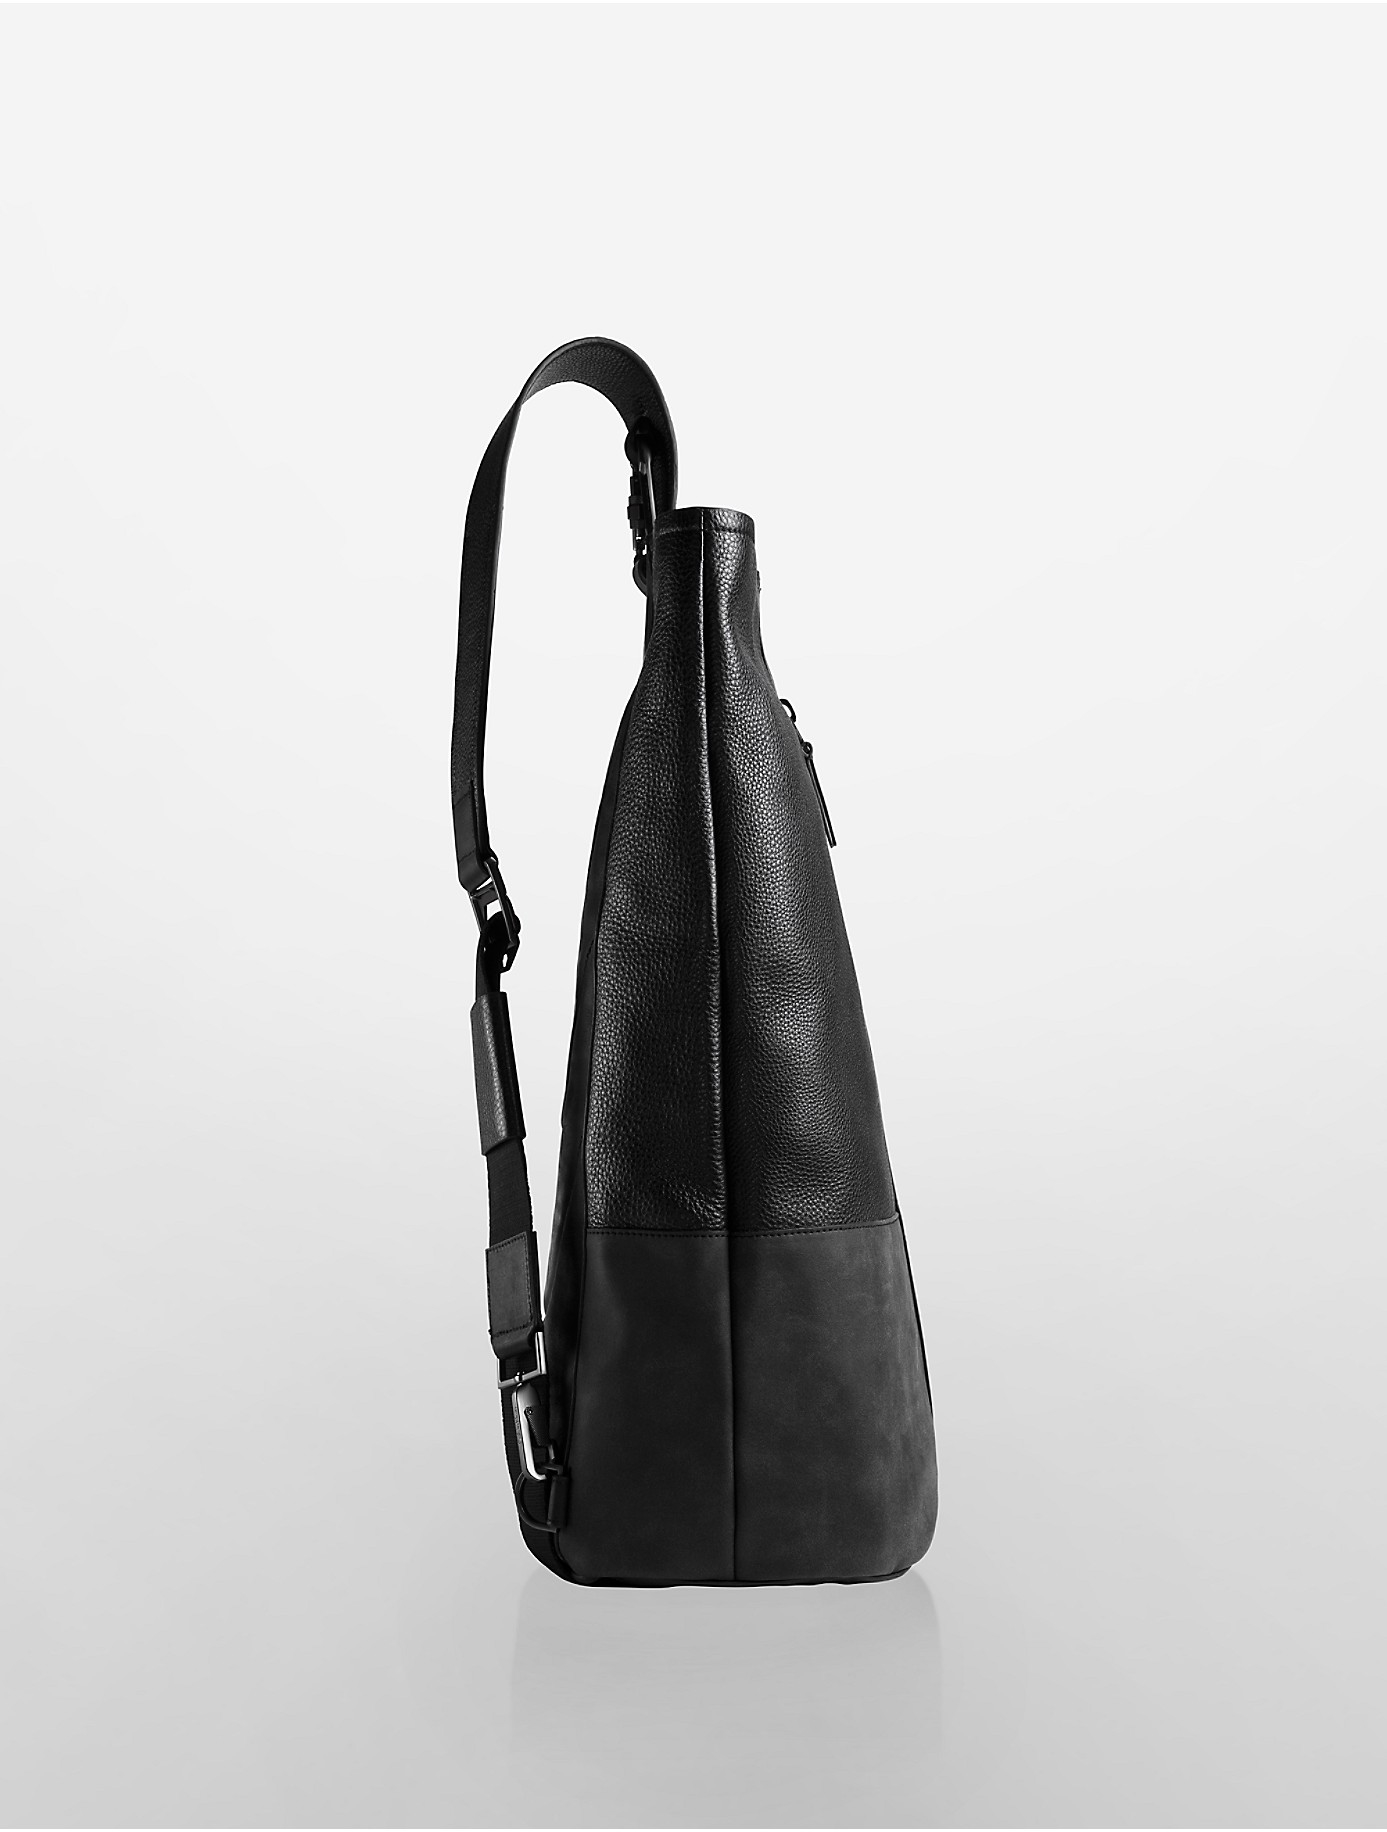 Lyst - Calvin Klein Jeans Pebble Textured Leather Large Sling Backpack in Black